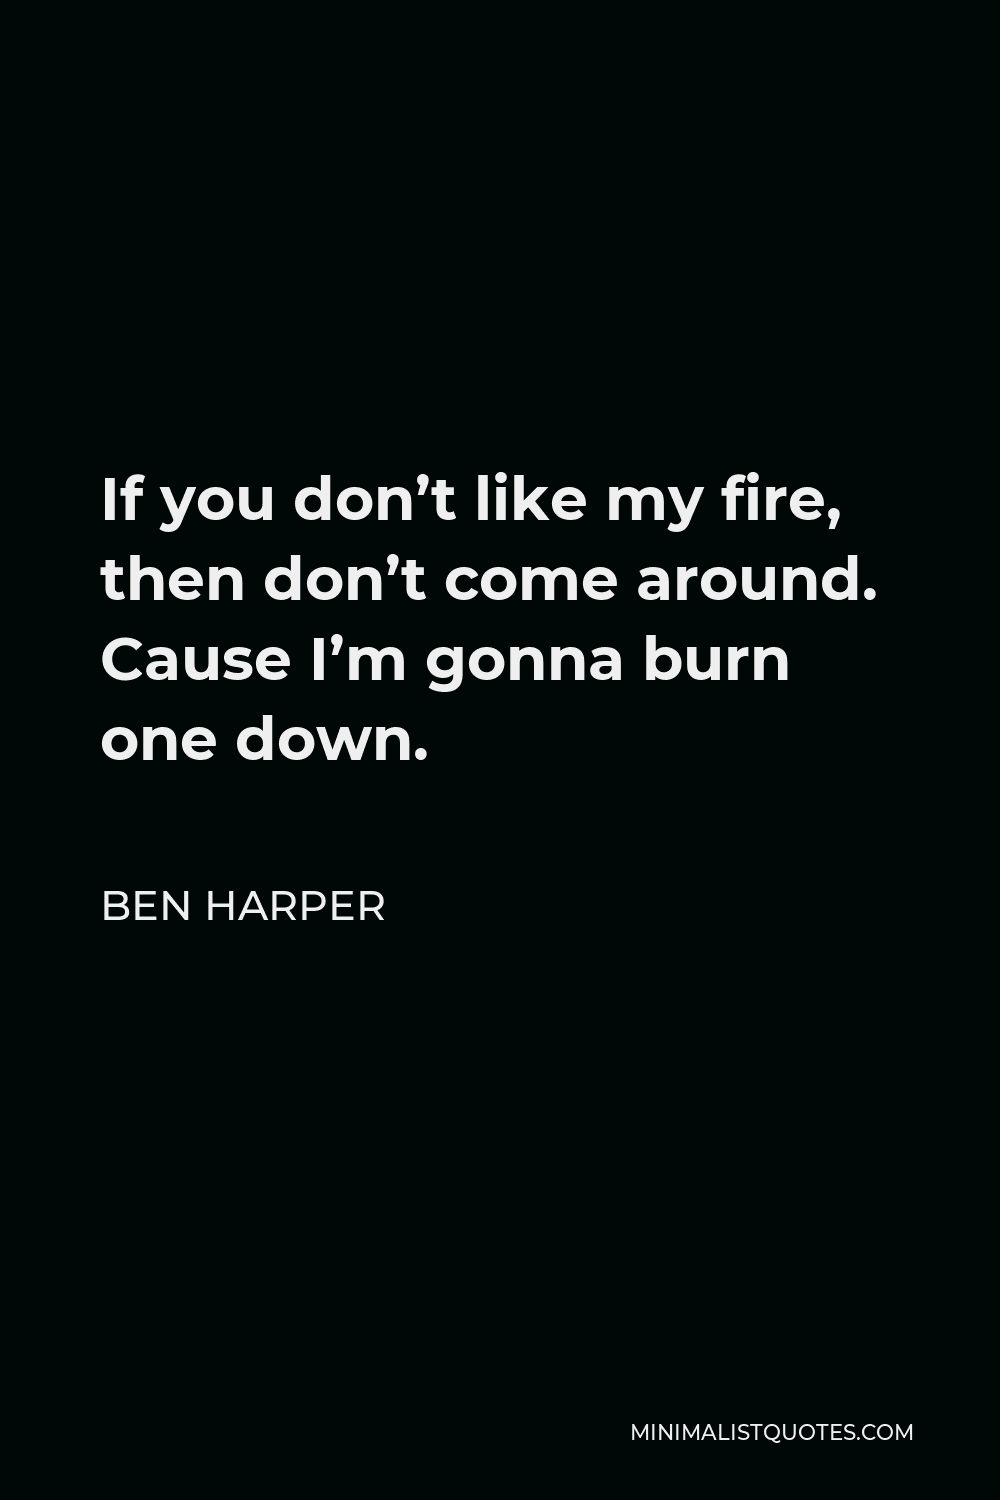 Ben Harper Quote - If you don’t like my fire, then don’t come around. Cause I’m gonna burn one down.